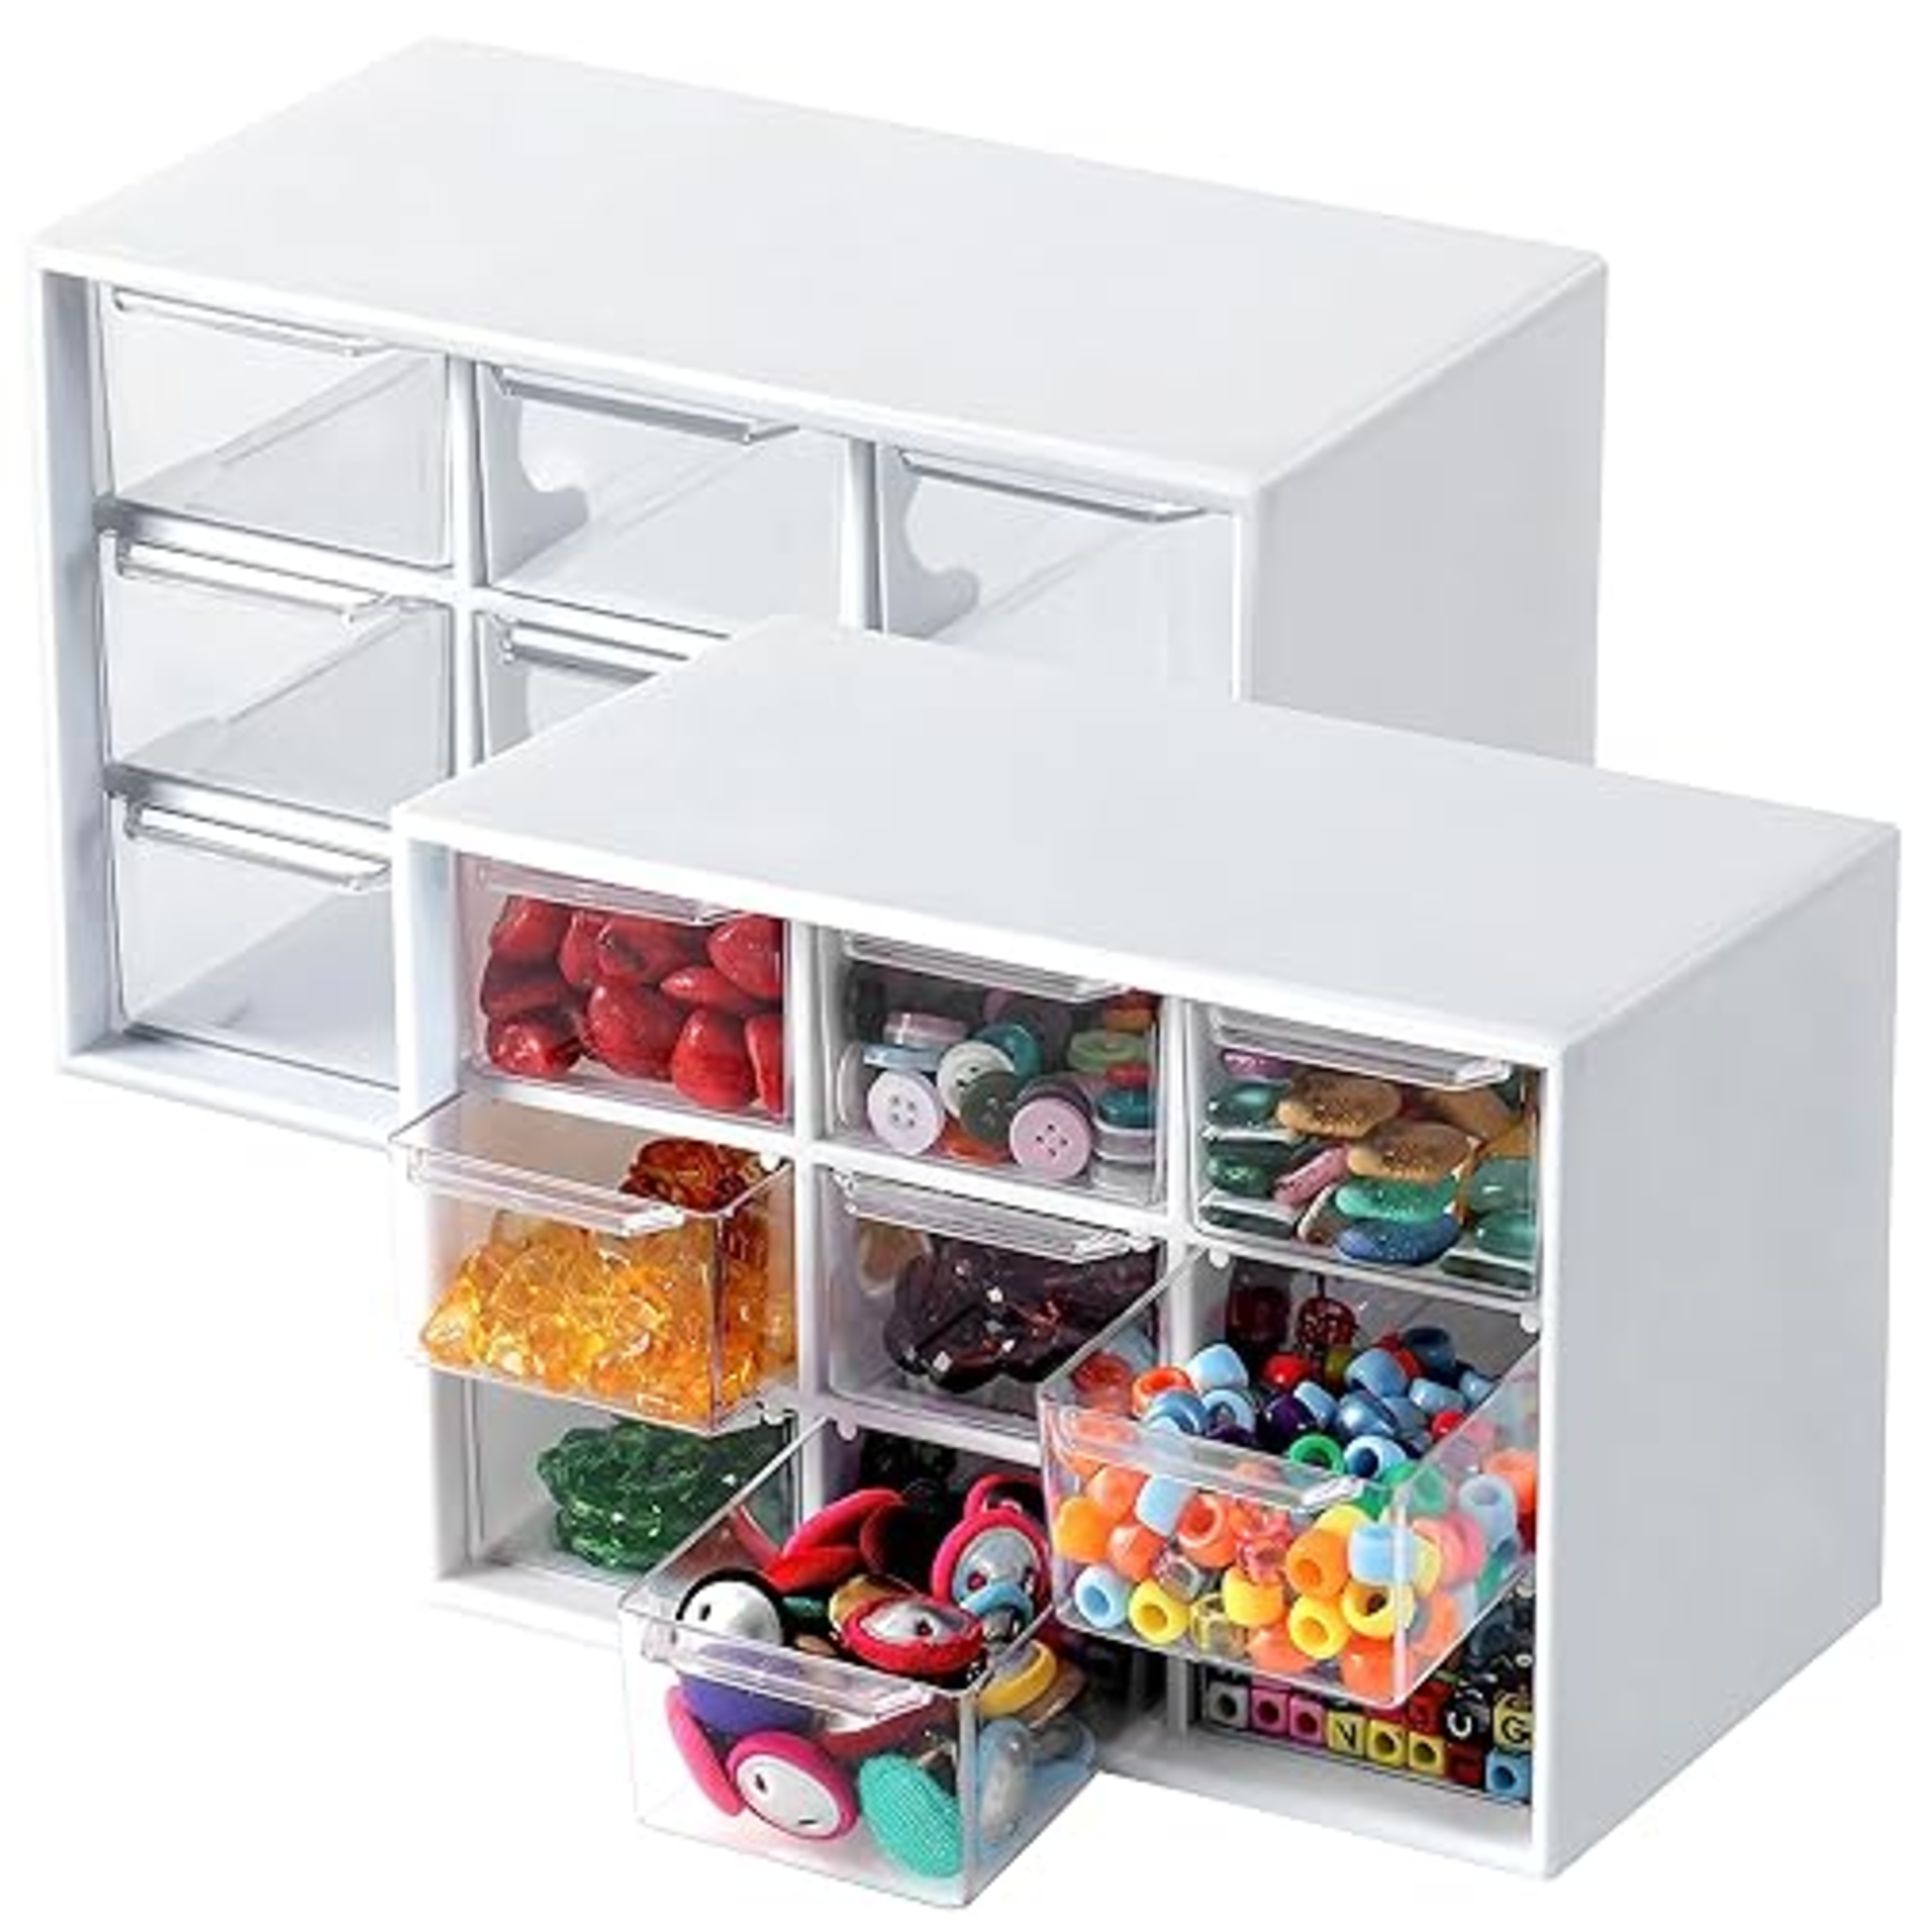 Winter Shore 9-Drawer Storage Containers [2 Pack] - Clear & White Desk Organiser - Removable Plasti